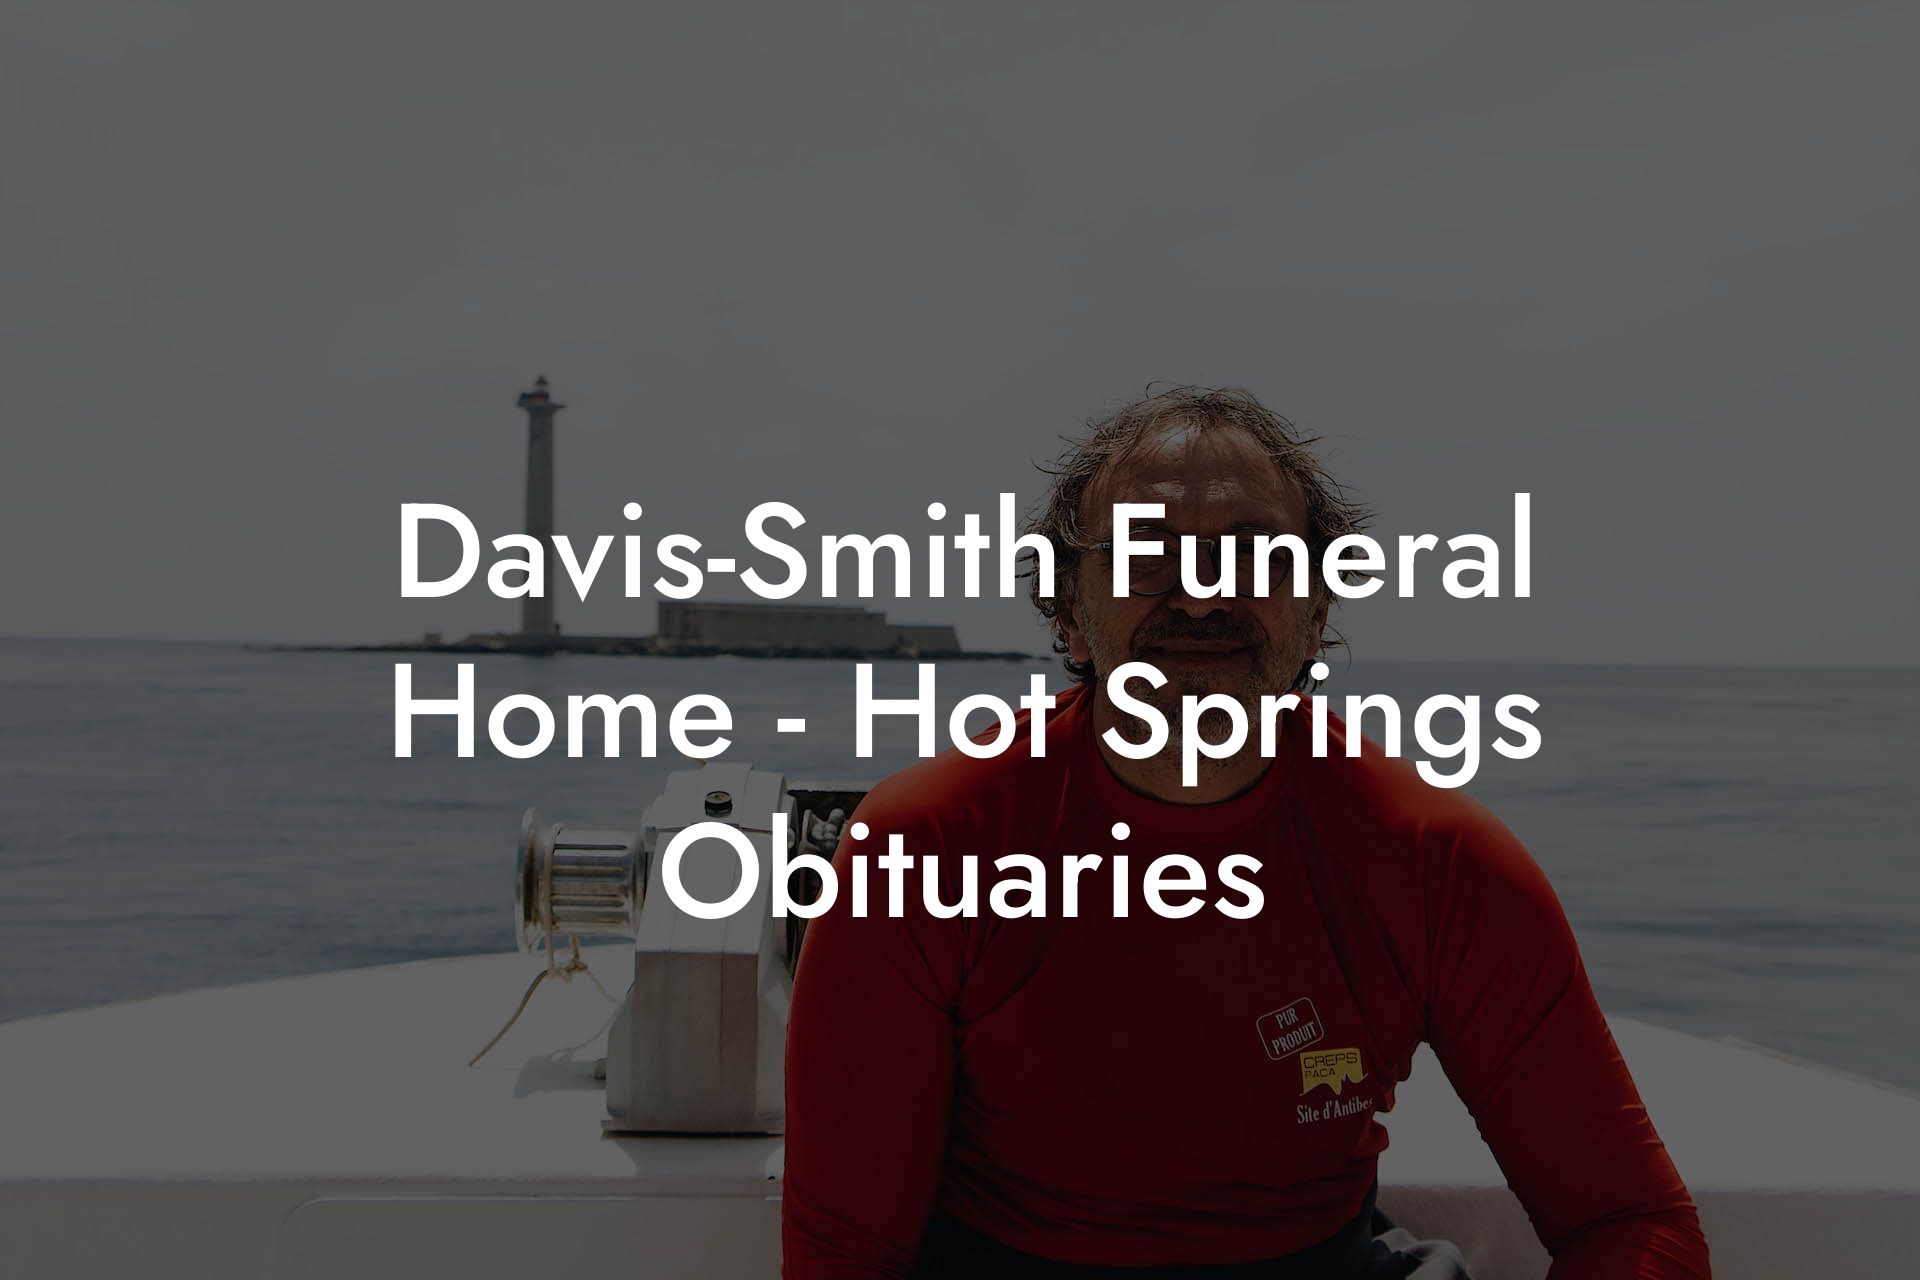 Davis-Smith Funeral Home - Hot Springs Obituaries